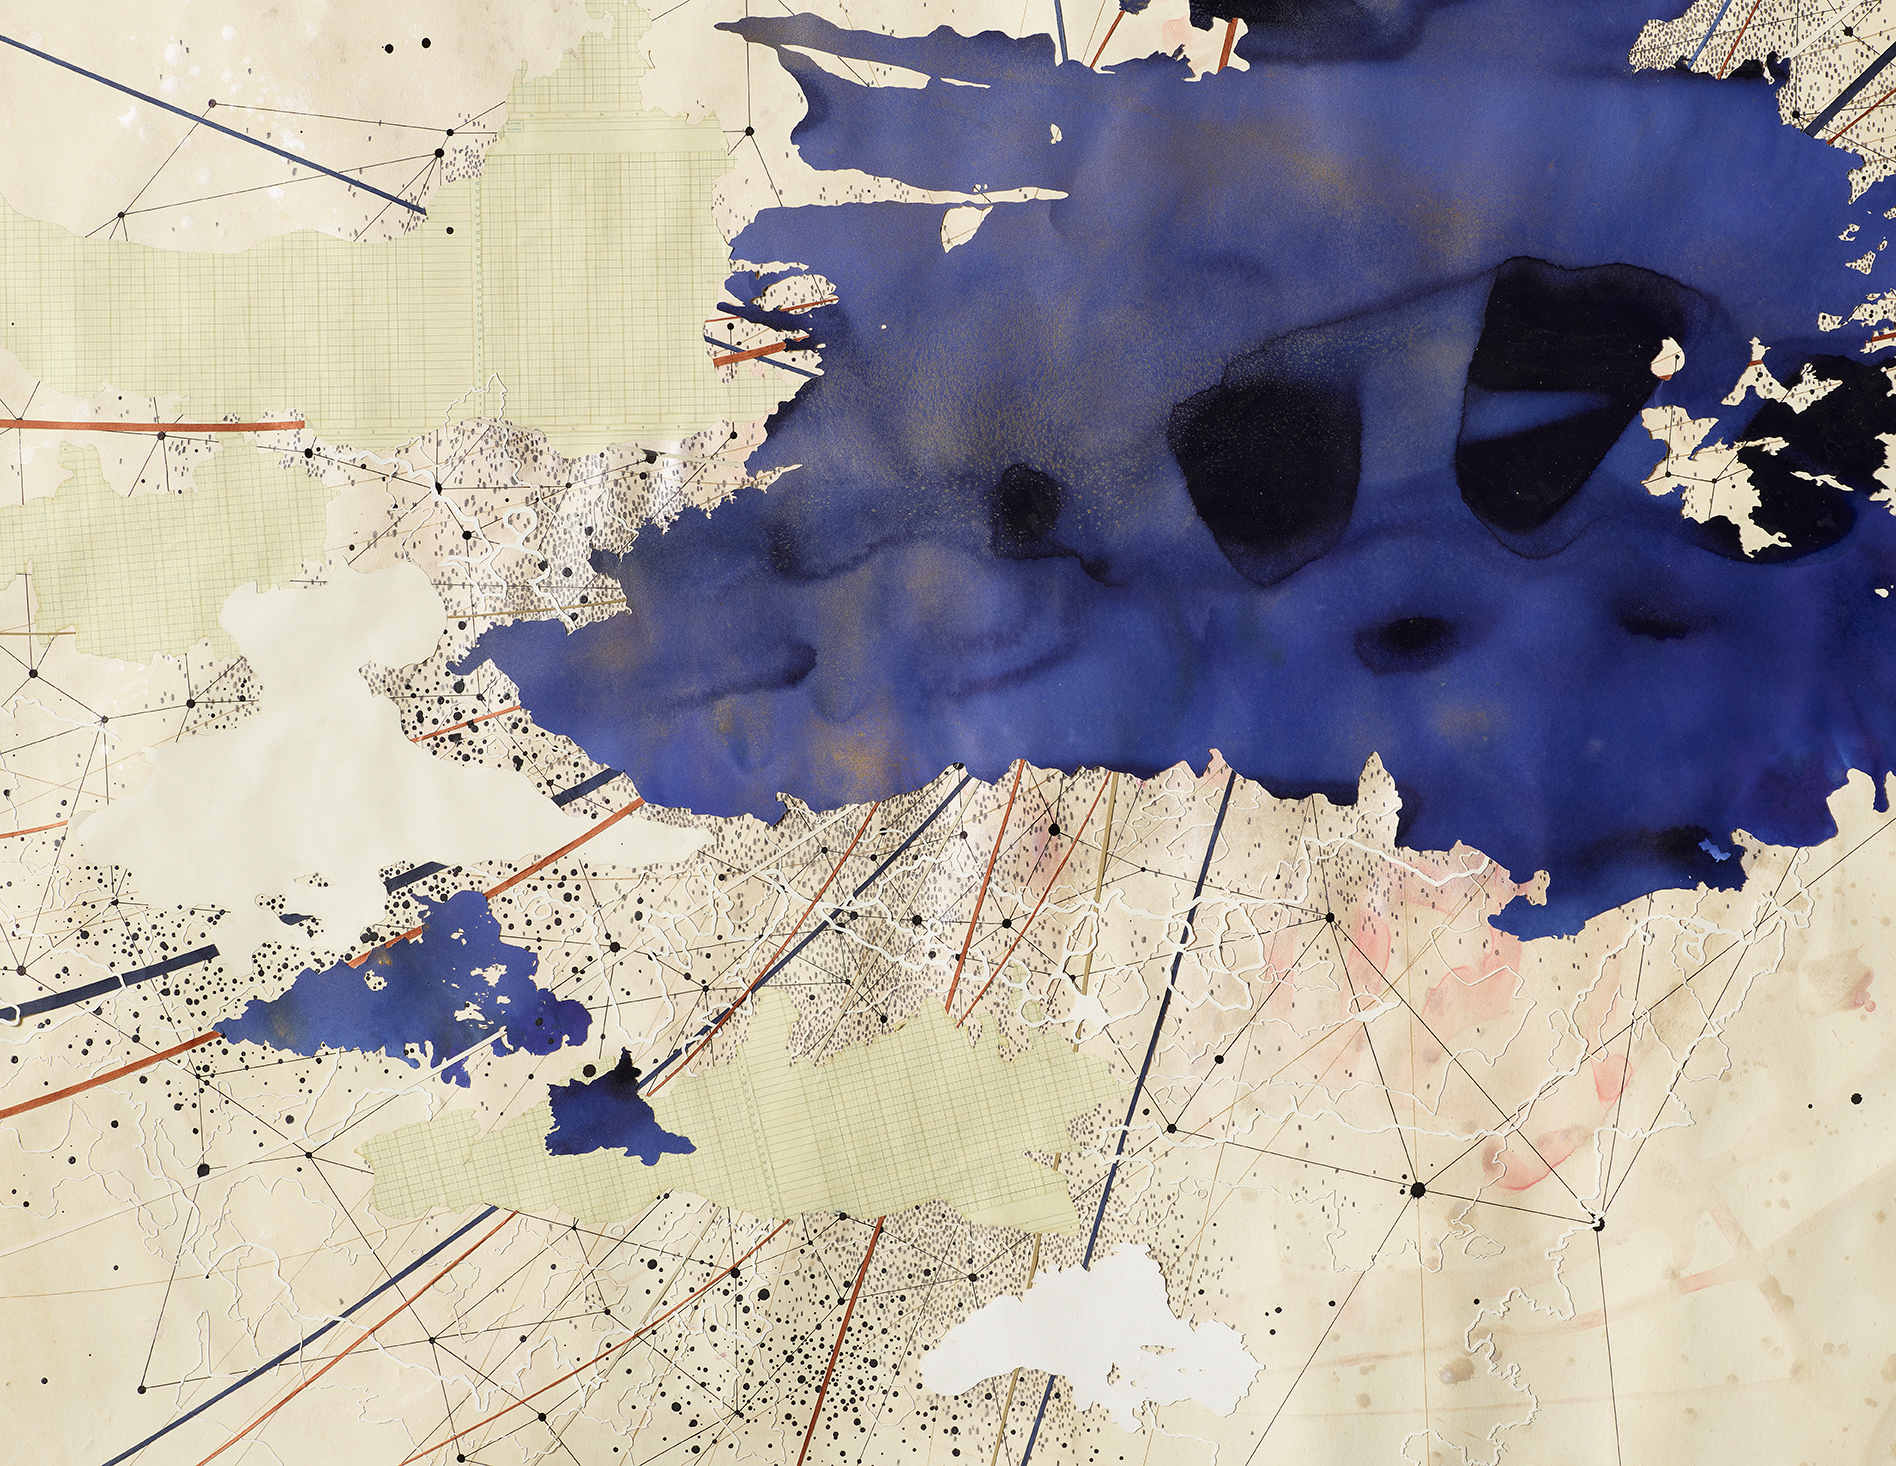  Val Britton,&nbsp; Dream in Blue, &nbsp;(detail), 2018, acrylic, ink, graphite, and collage, 60 x 72 inches (152.4 x 182.9 cm) 